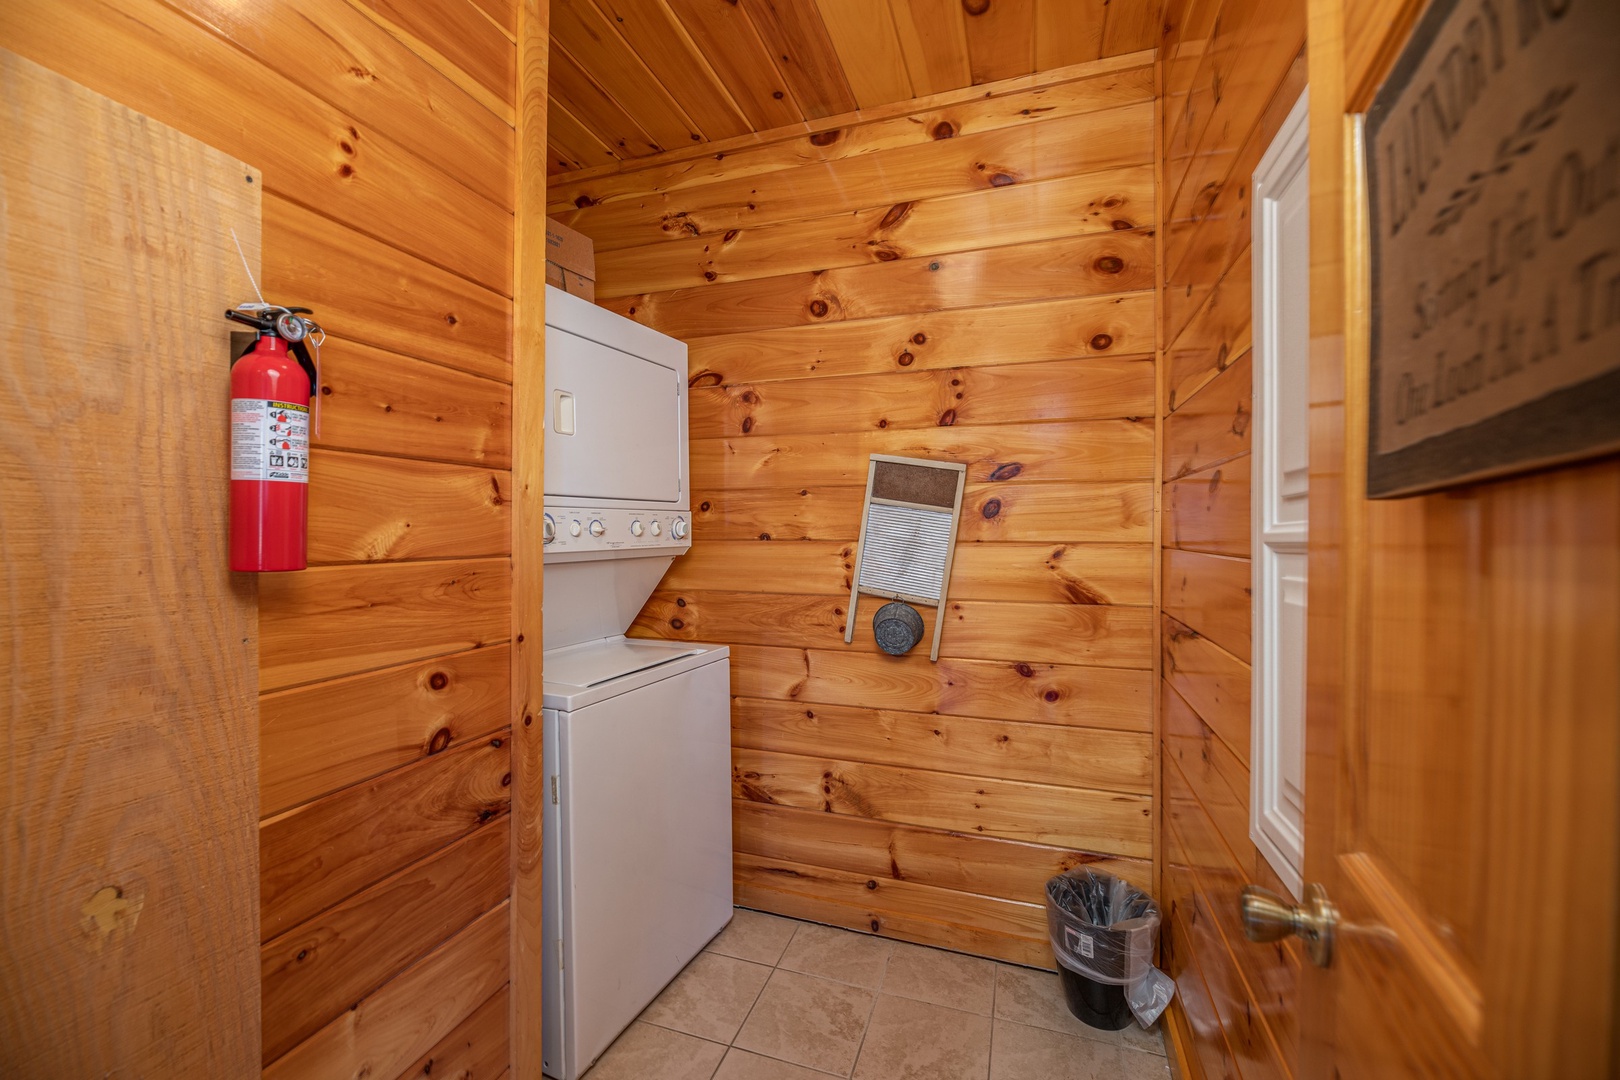 Laundry space at Hickernut Lodge, a 5-bedroom cabin rental located in Pigeon Forge